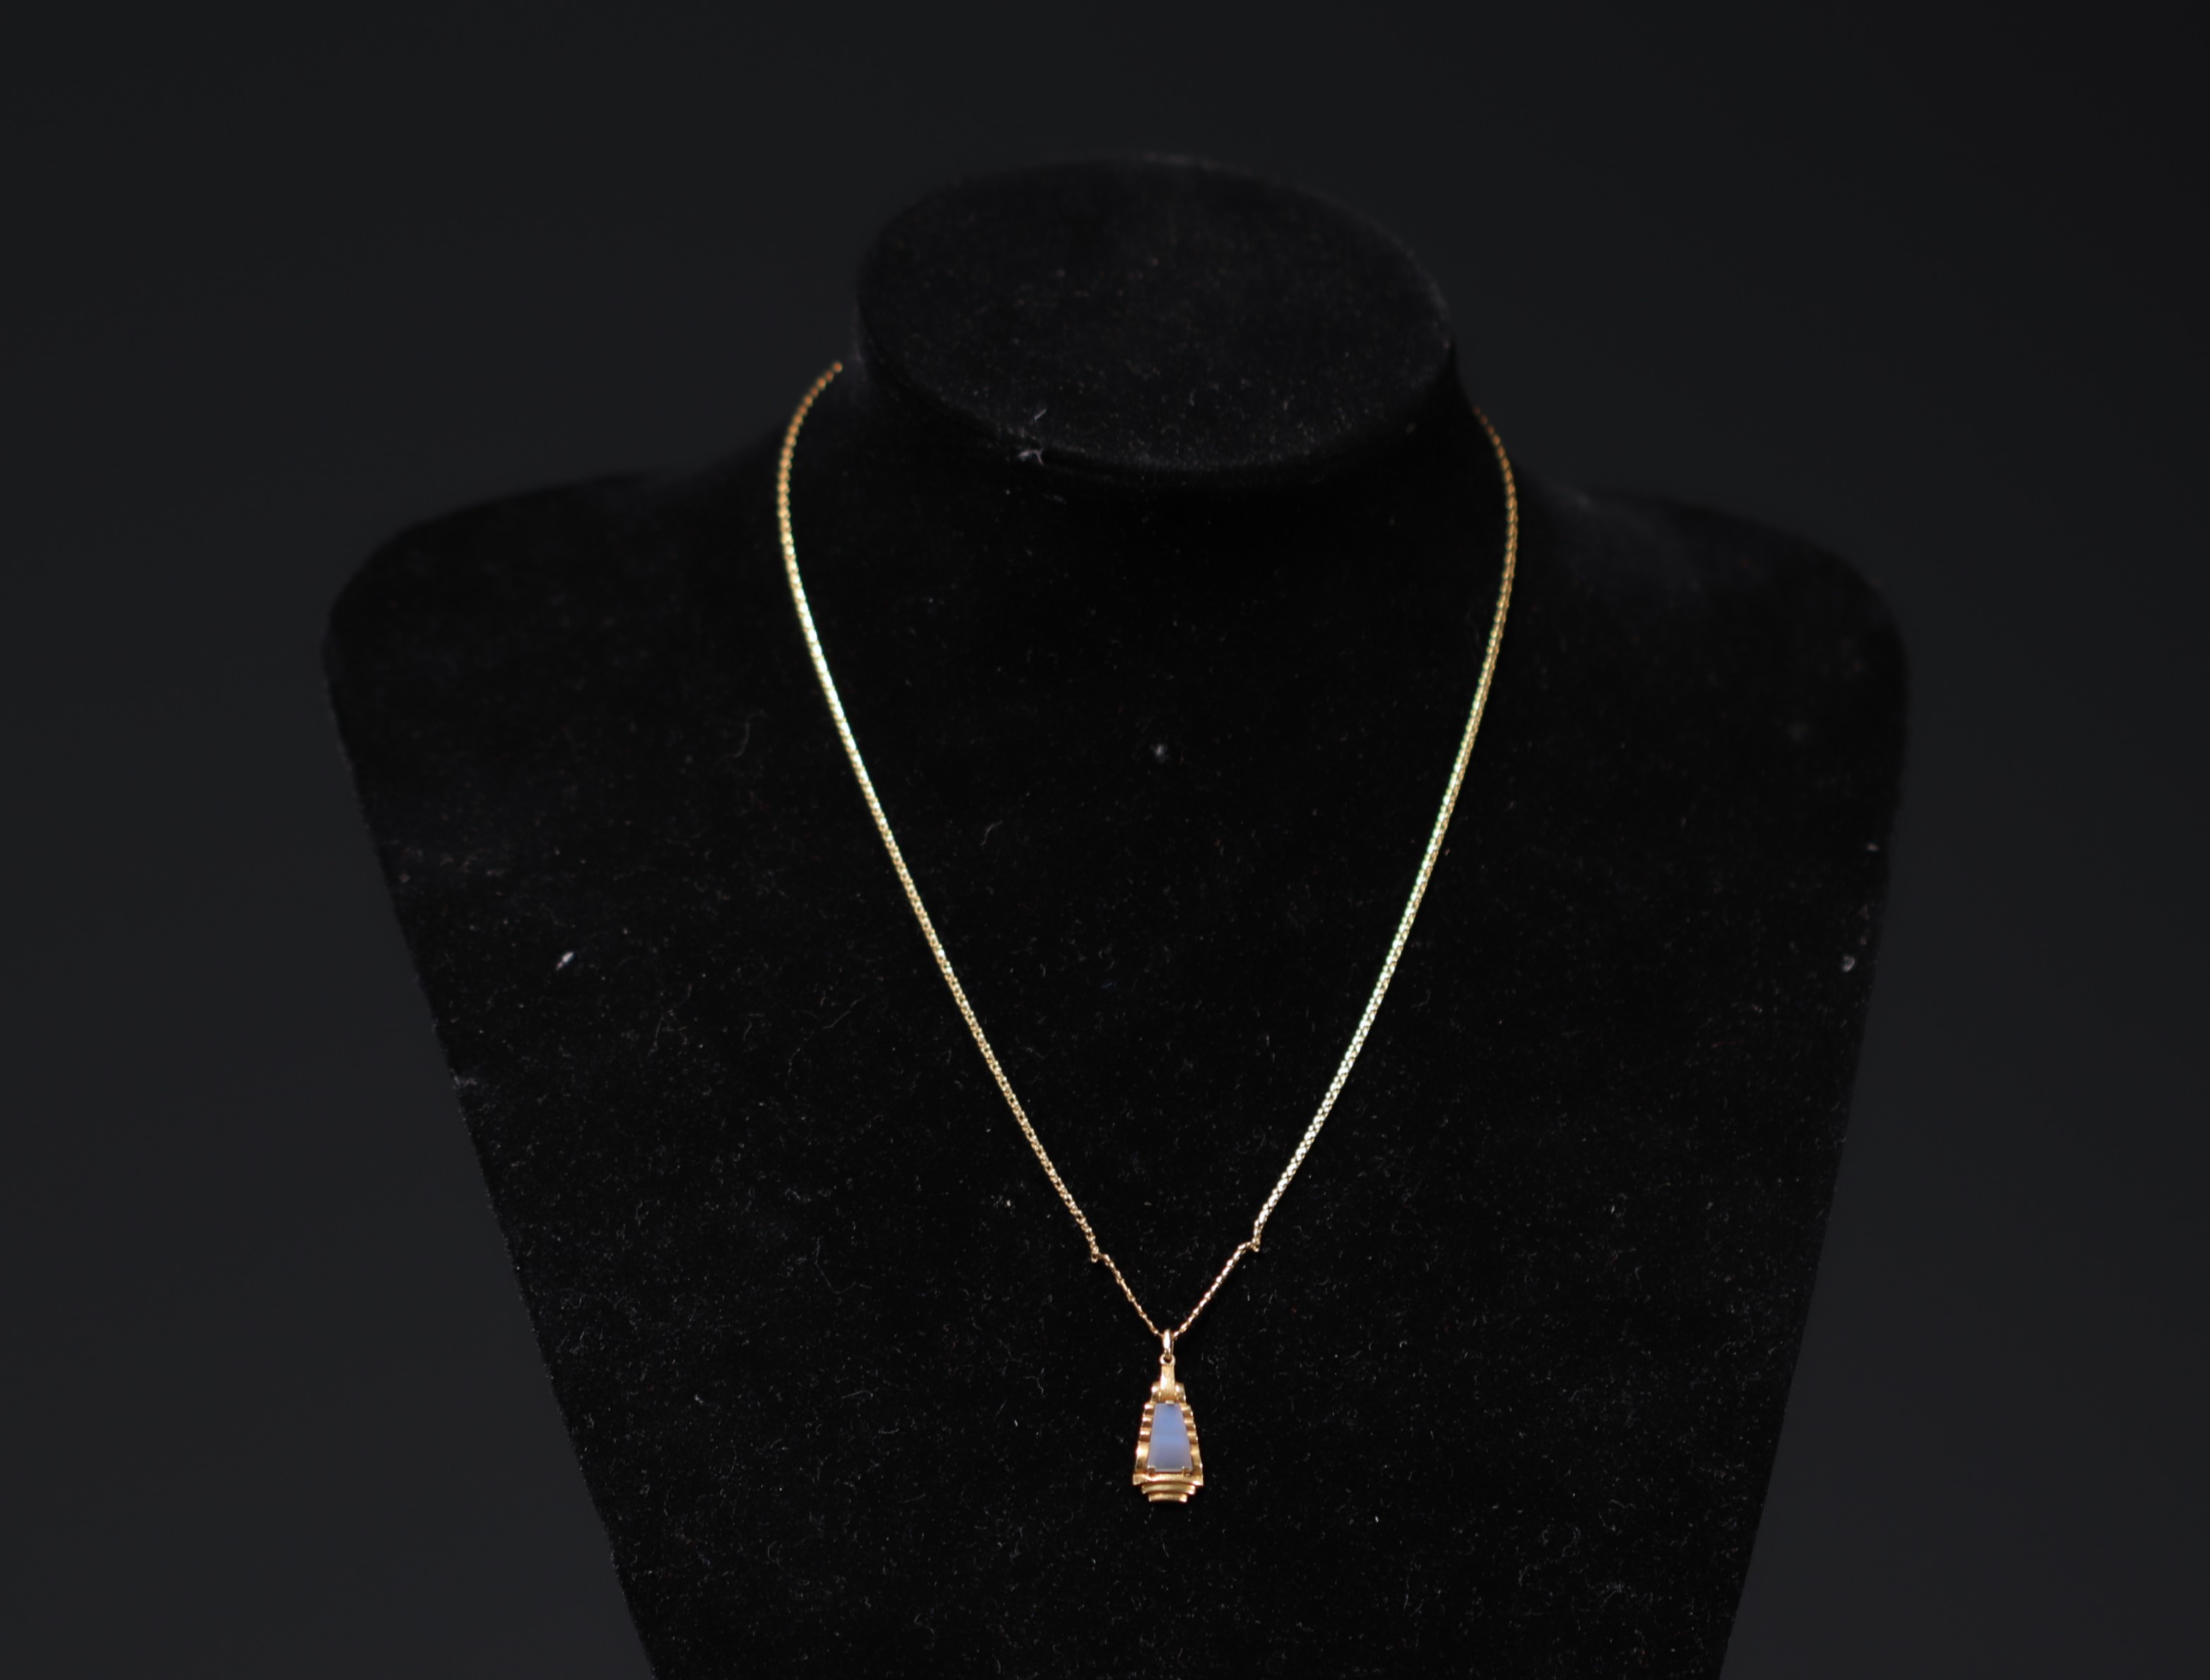 Art Deco pendant in 18K yellow gold, milky opal, total weight 5.1gr. - Image 3 of 3